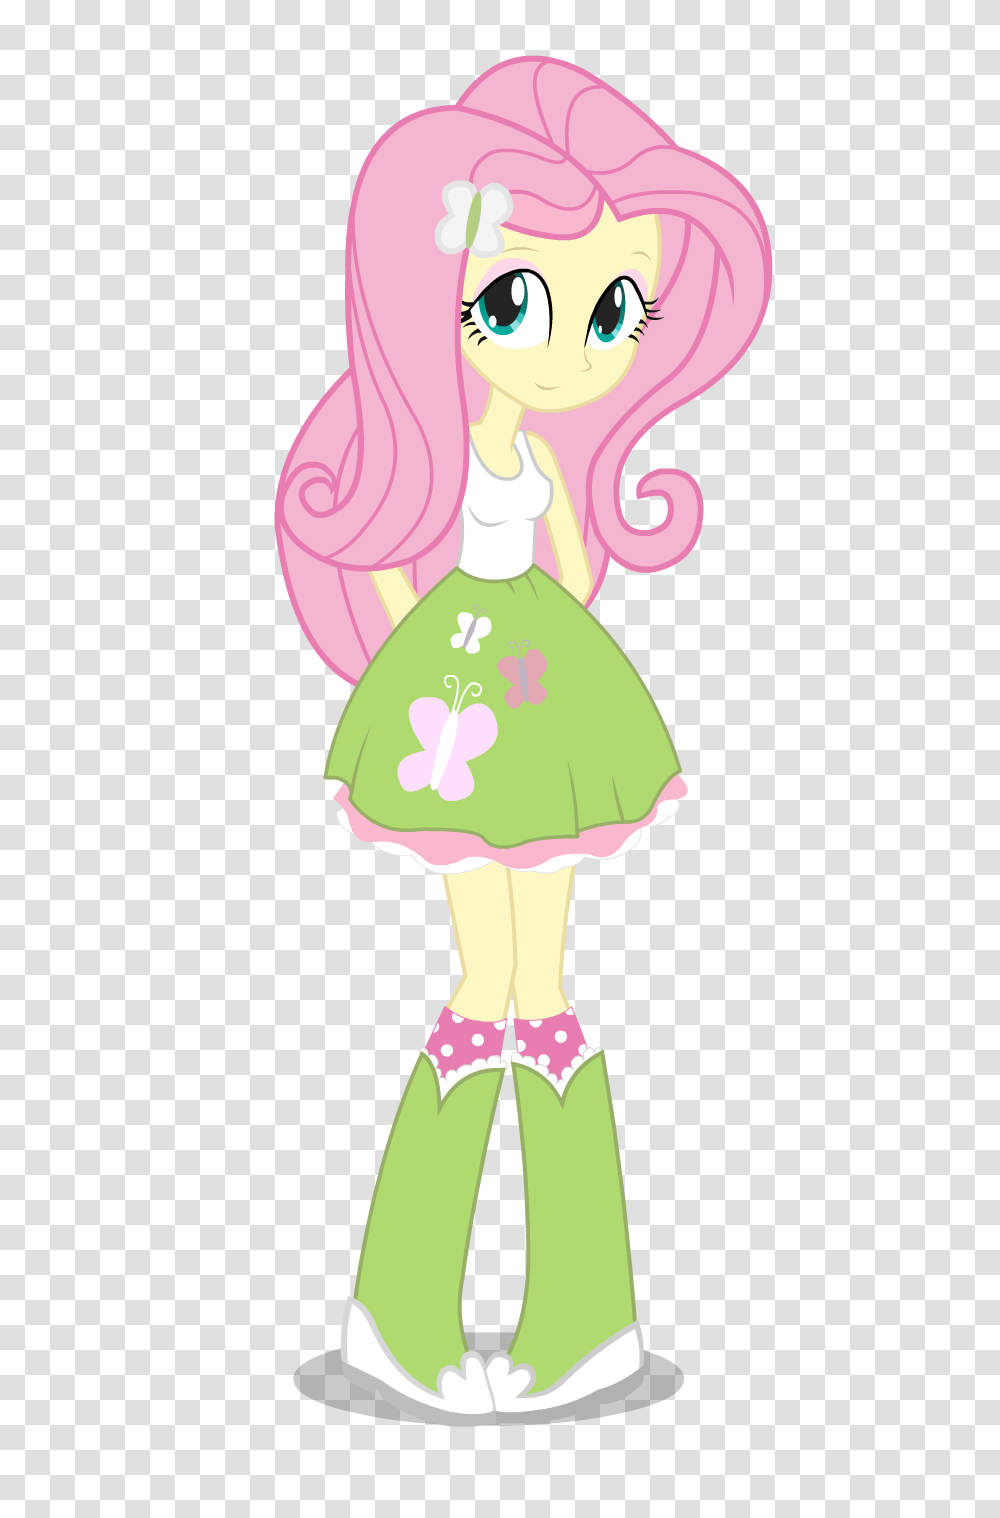 My Little Pony Fluttershy Equestria Costume, Toy, Figurine, Drawing Transparent Png